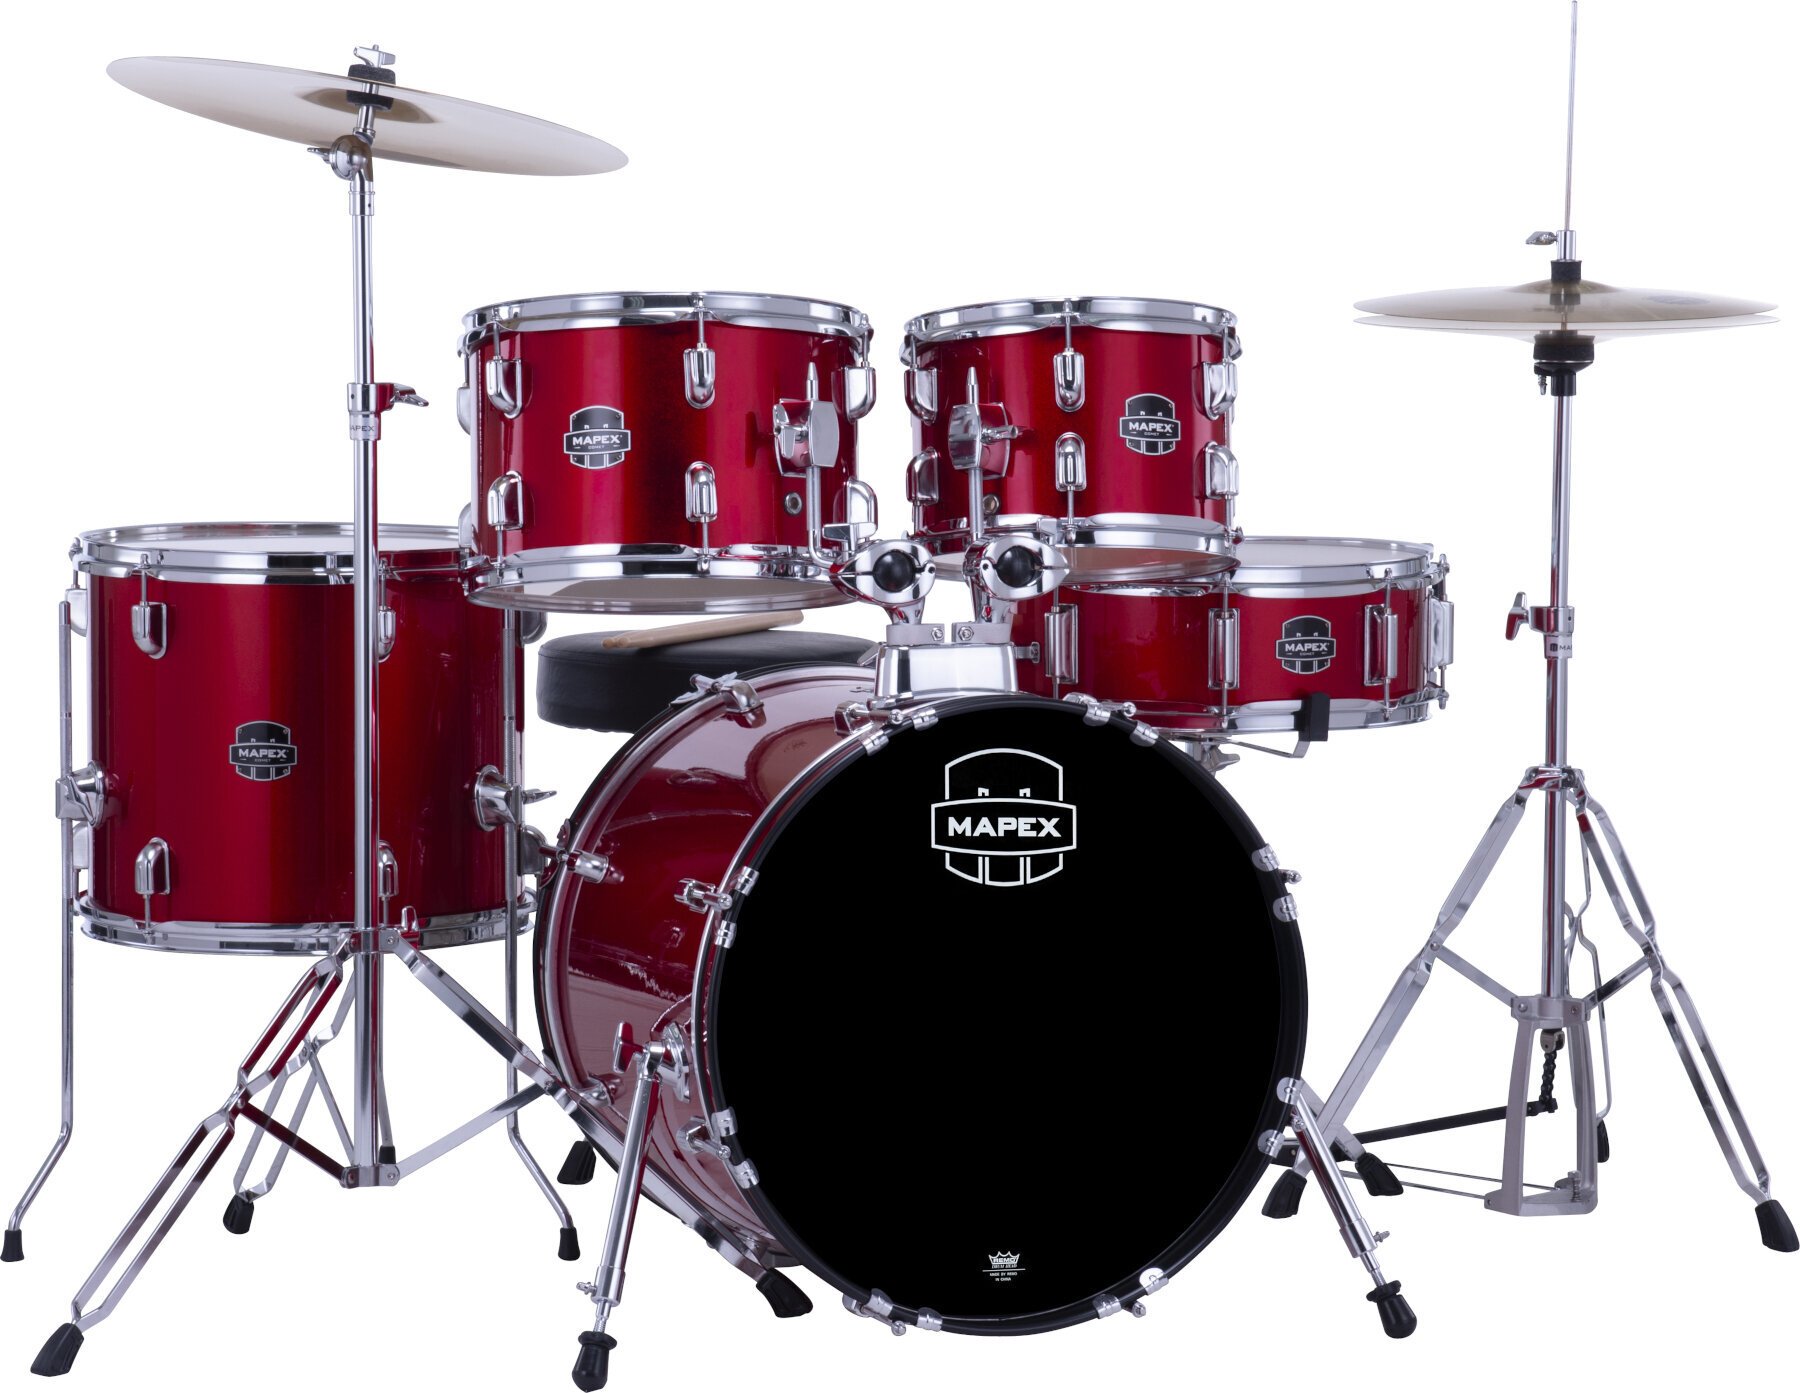 Mapex CM5844FTCIR Comet Infra Red Mapex